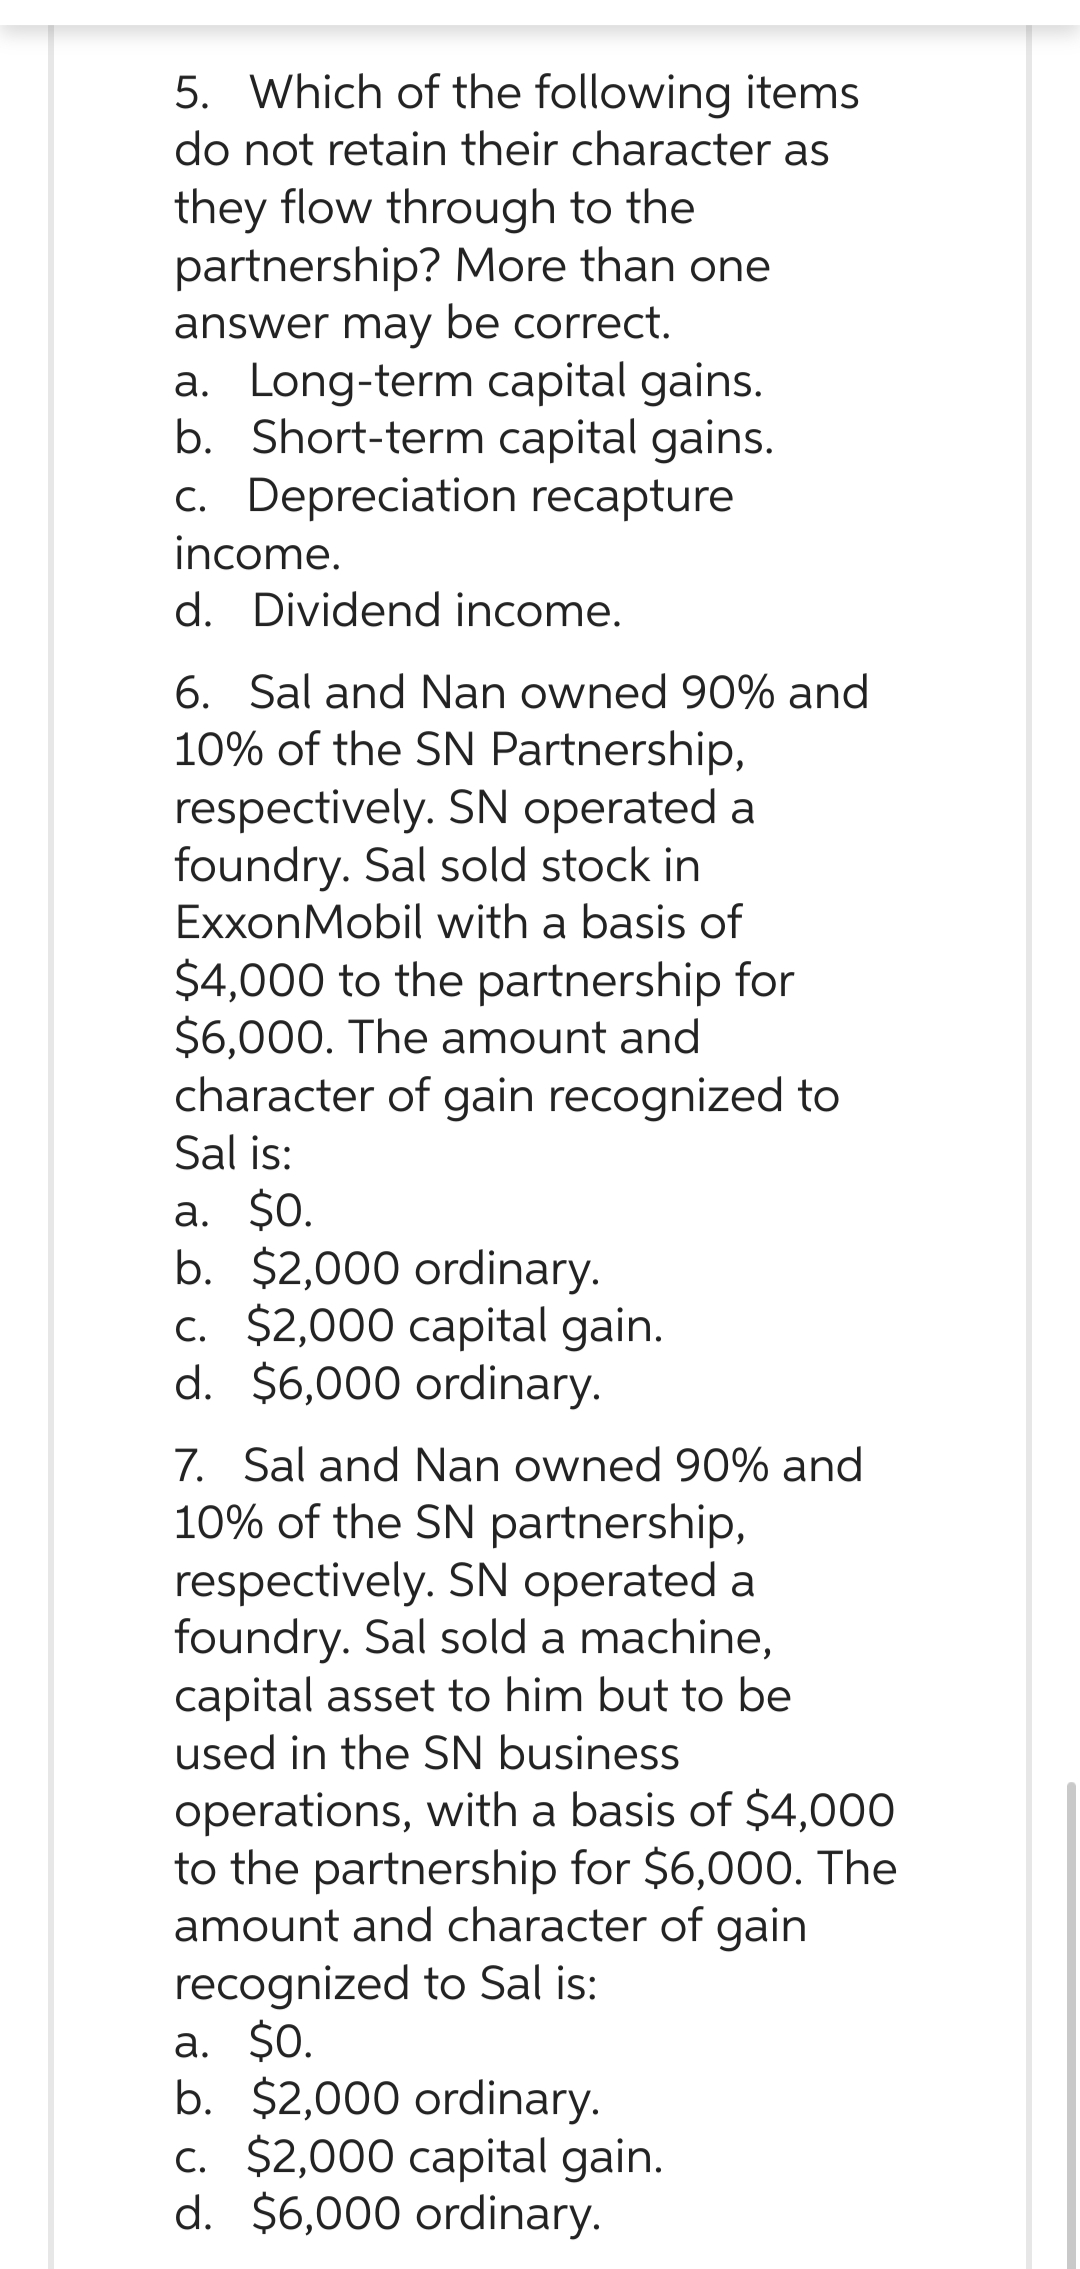 5. Which of the following items
do not retain their character as
they flow through to the
partnership? More than one
answer may be correct.
a. Long-term capital gains.
b. Short-term capital gains.
c. Depreciation recapture
income.
d. Dividend income.
6. Sal and Nan owned 90% and
10% of the SN Partnership,
respectively. SN operated a
foundry. Sal sold stock in
ExxonMobil with a basis of
$4,000 to the partnership for
$6,000. The amount and
character of gain recognized to
Sal is:
a. $0.
b. $2,000 ordinary.
c. $2,000 capital gain.
d. $6,000 ordinary.
7. Sal and Nan owned 90% and
10% of the SN partnership,
respectively. SN operated a
foundry. Sal sold a machine,
capital asset to him but to be
used in the SN business
operations, with a basis of $4,000
to the partnership for $6,000. The
amount and character of gain
recognized to Sal is:
a. $0.
b. $2,000 ordinary.
c. $2,000 capital gain.
d. $6,000 ordinary.